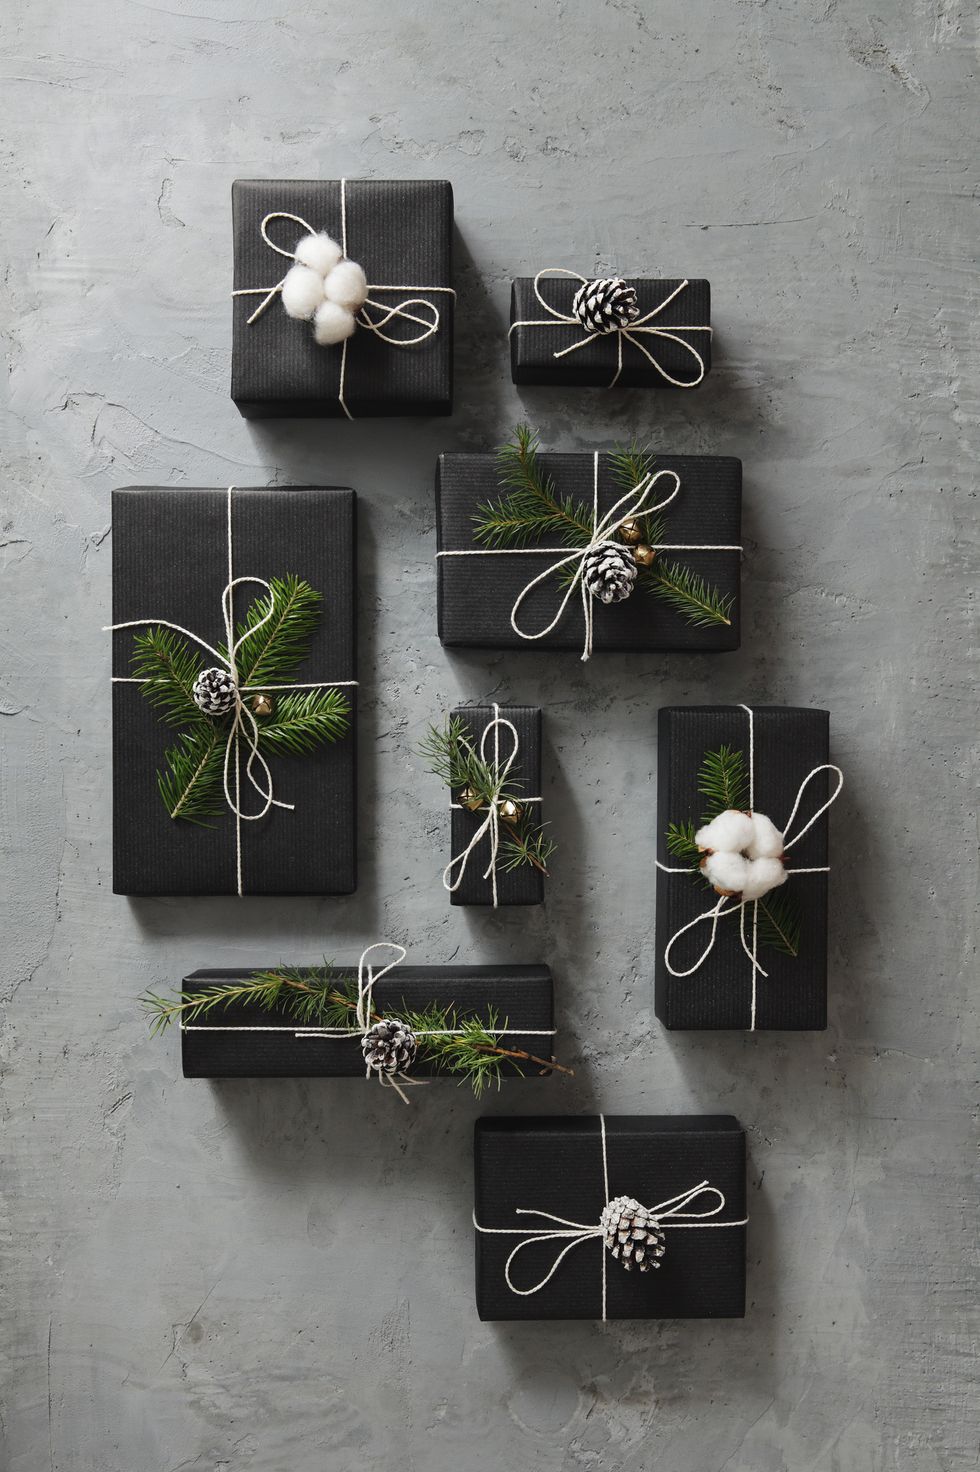 Wrapping Christmas Presents: 10 Ideas To Take Your Presents to the